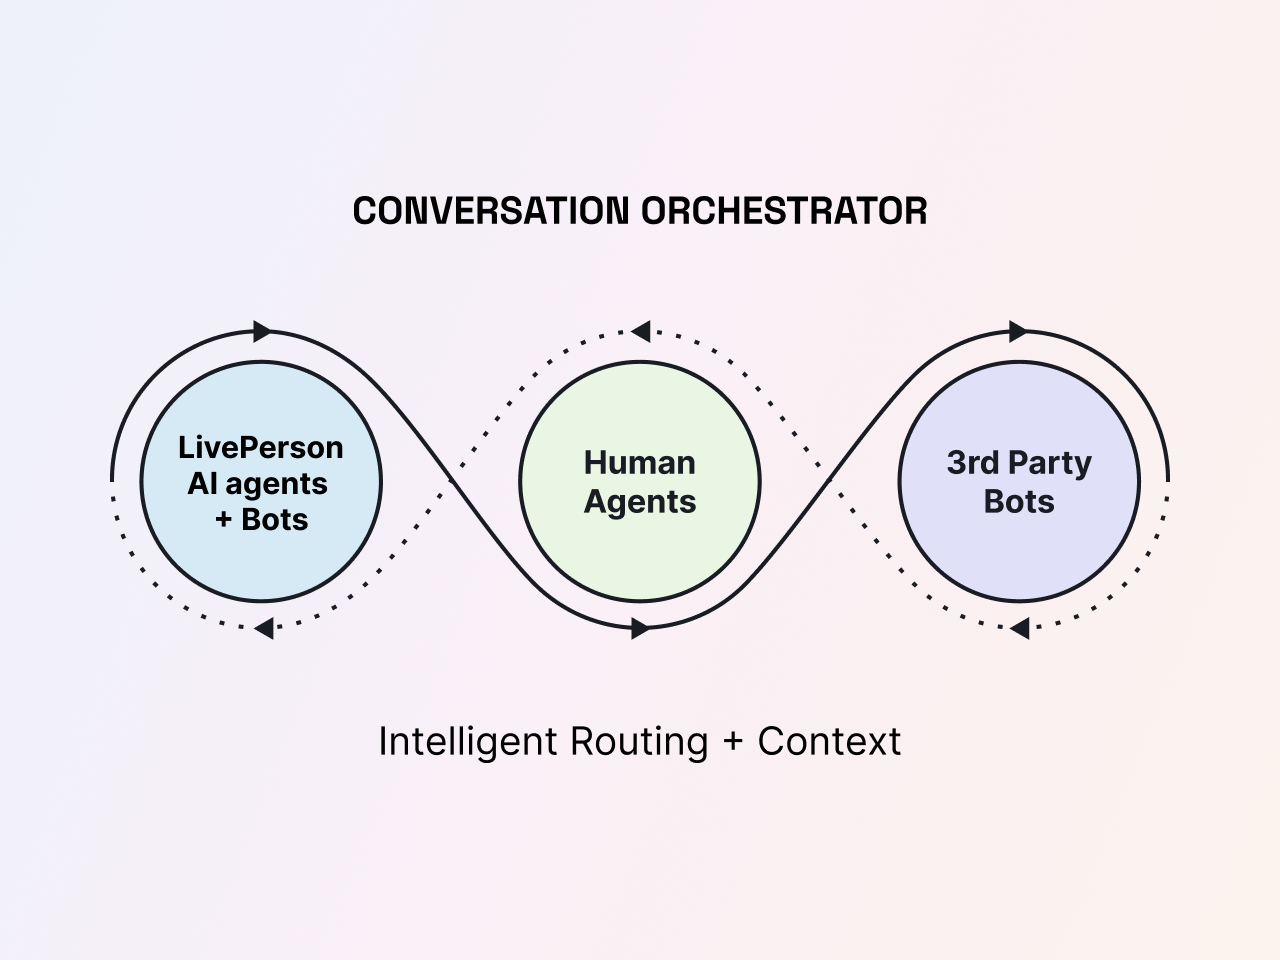 illustration of LivePerson's intelligent routing, including handoffs to LivePerson's generative AI models, human agents, or third-party bots.